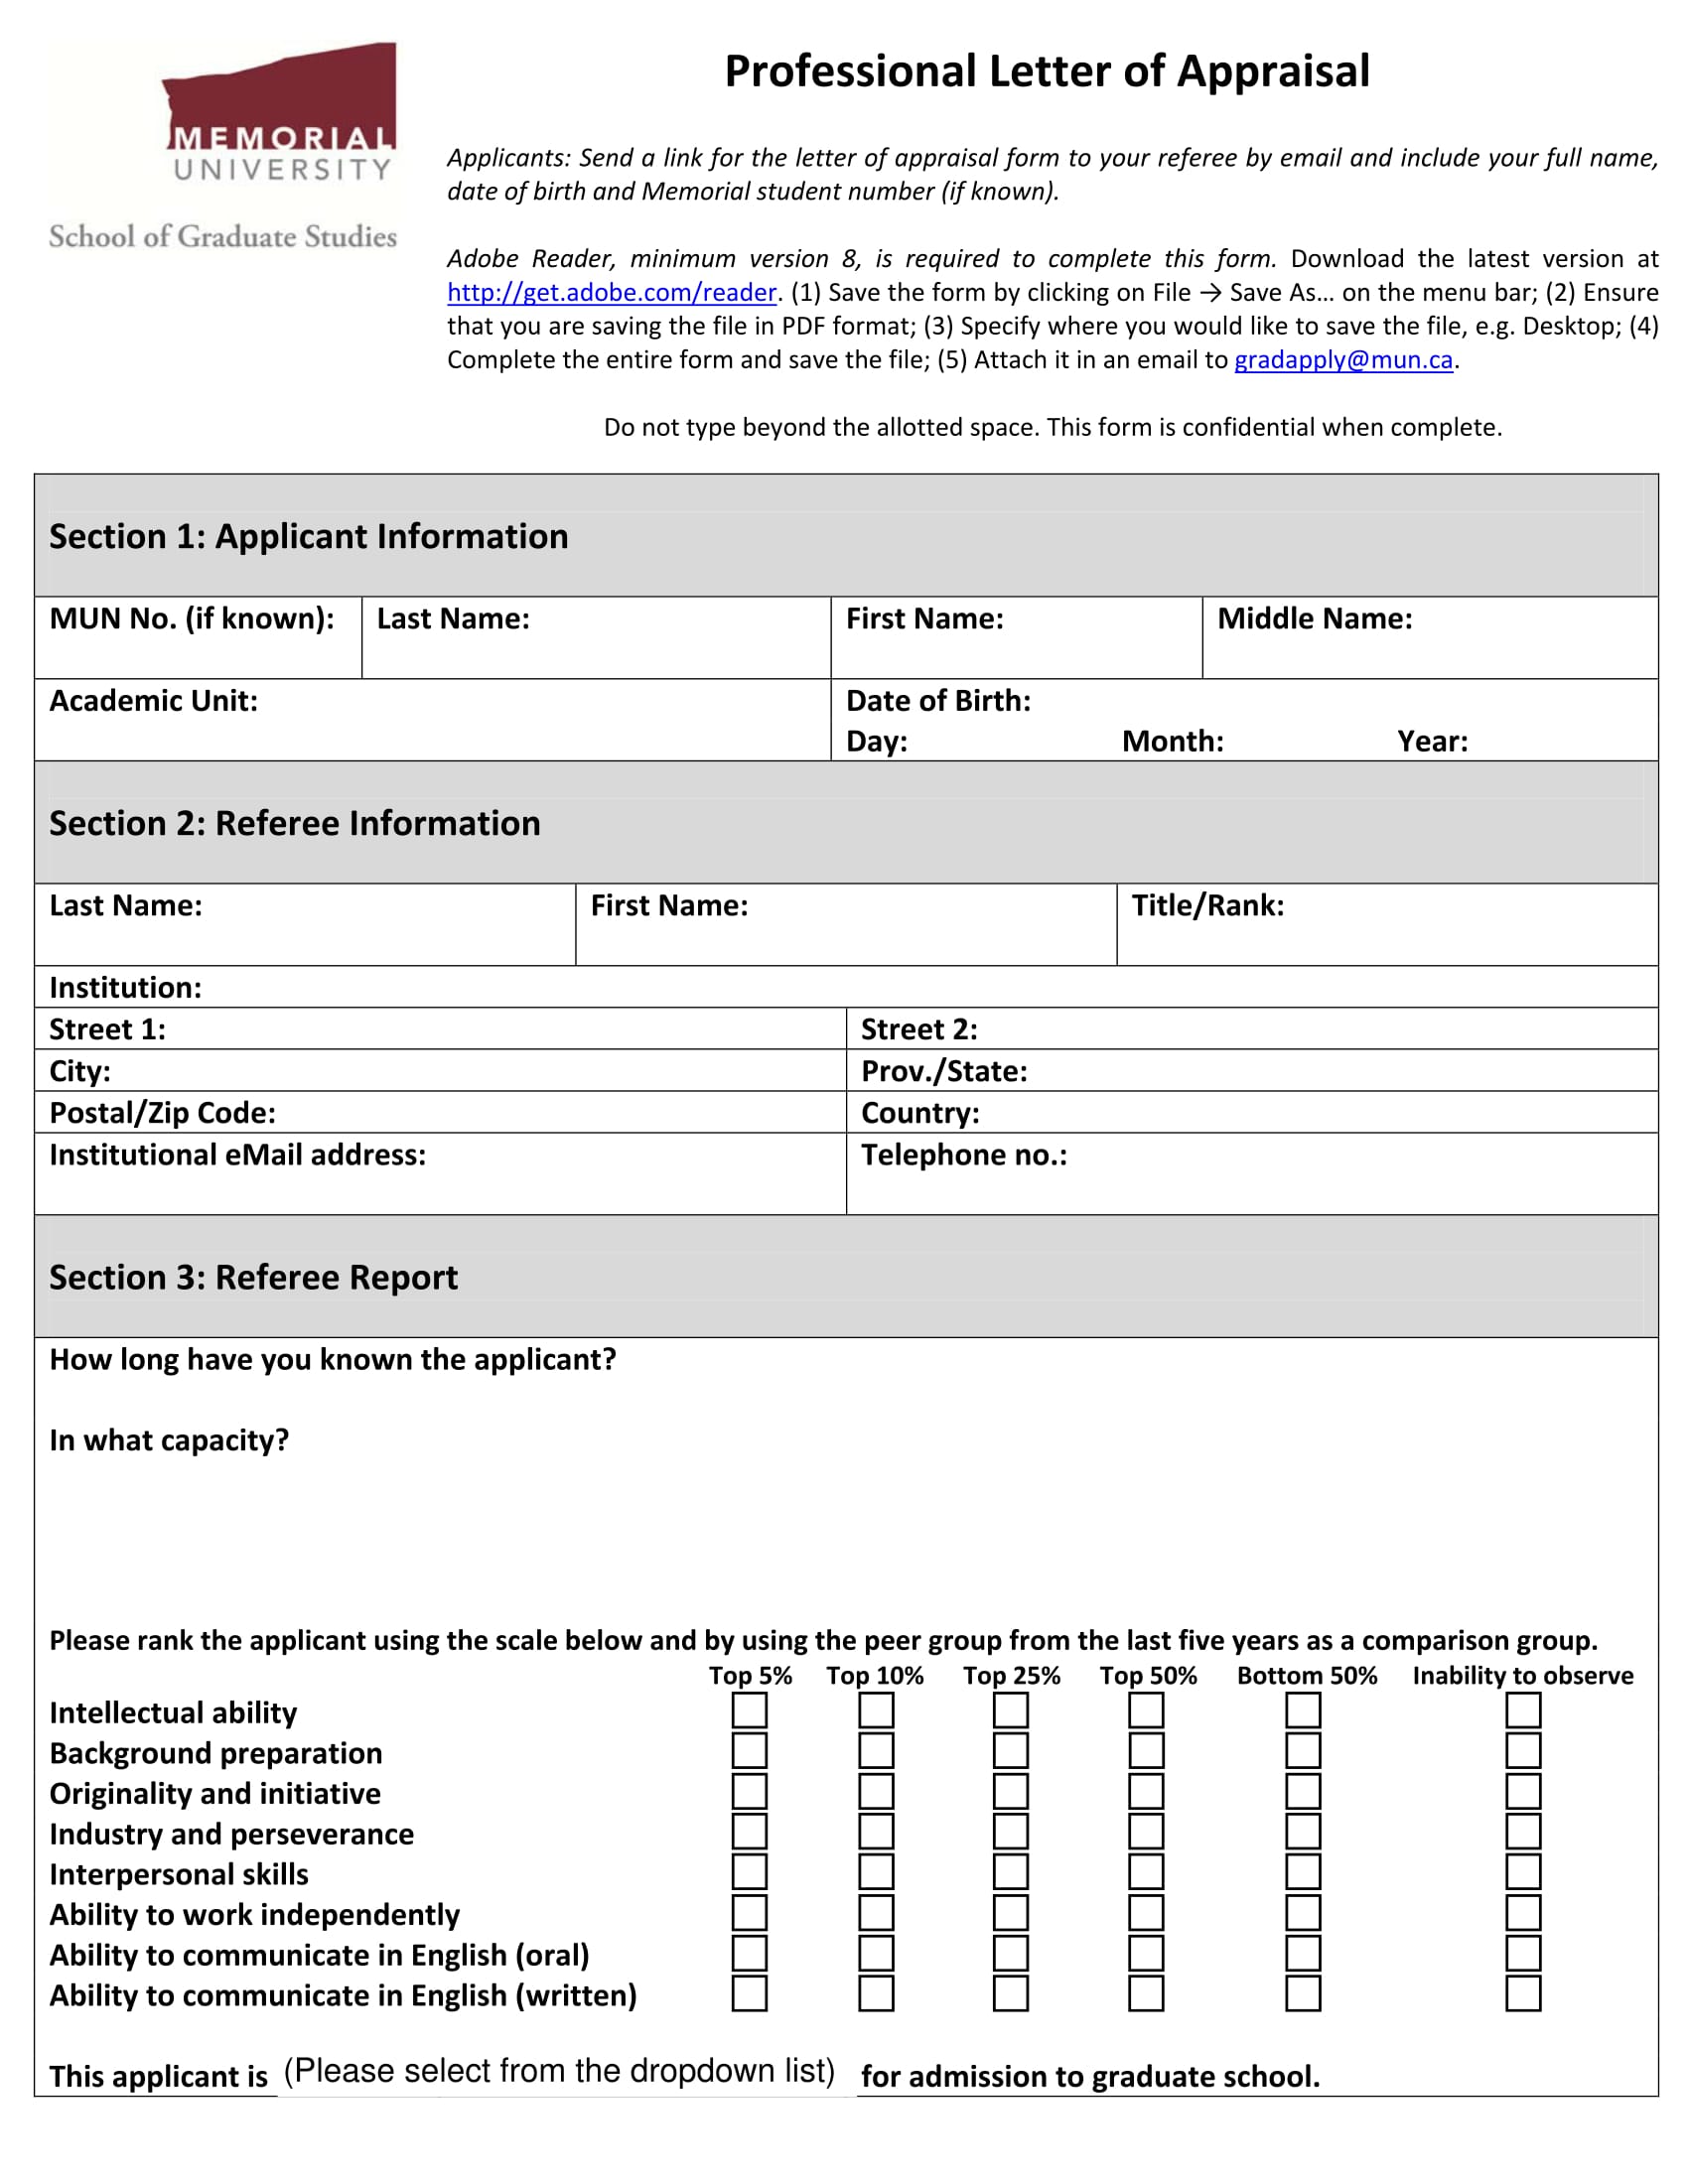 professional letter of appraisal form 11